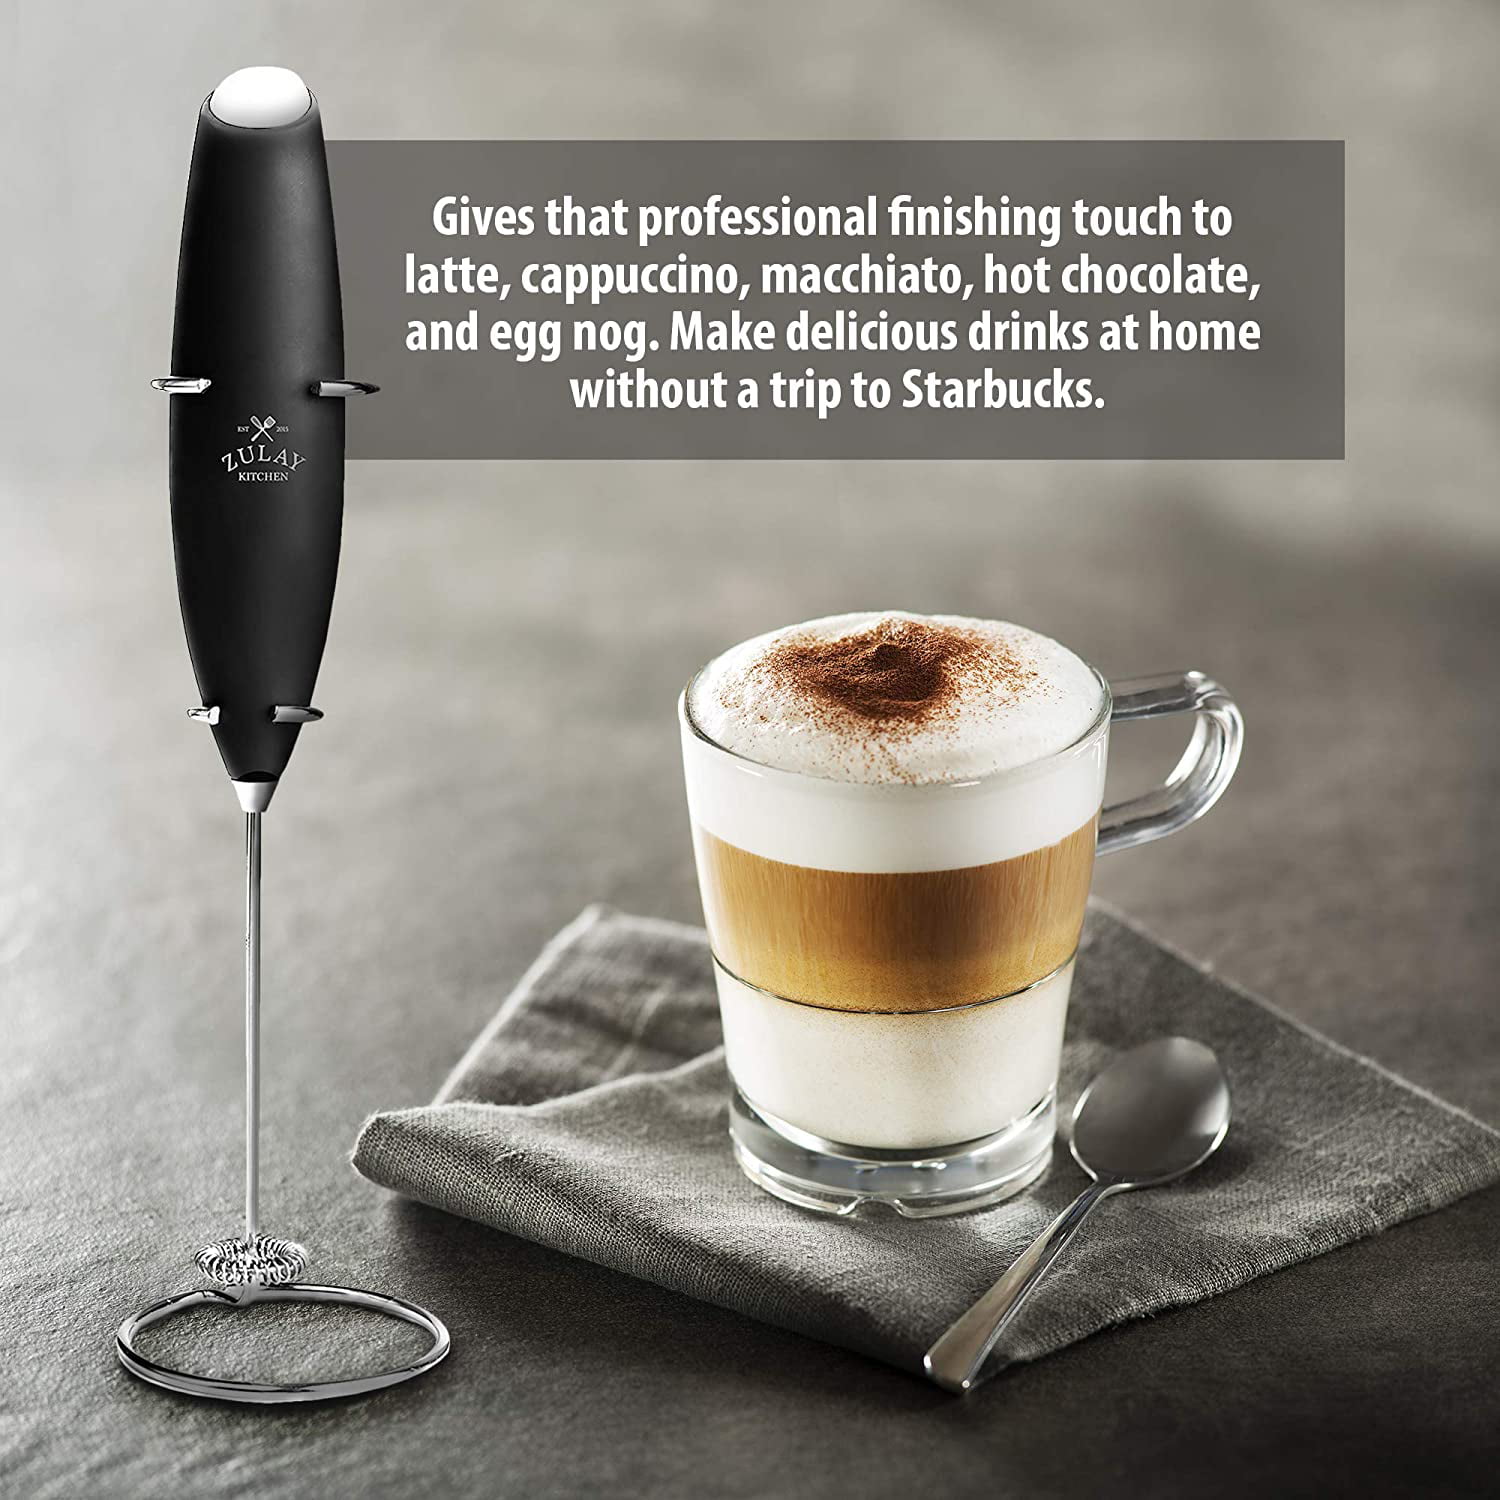 Zulay Kitchen High Powered Milk Frother Handheld Foam Maker for Lattes, Cappuccinos, Matcha, Frappe & More - Metallic Black